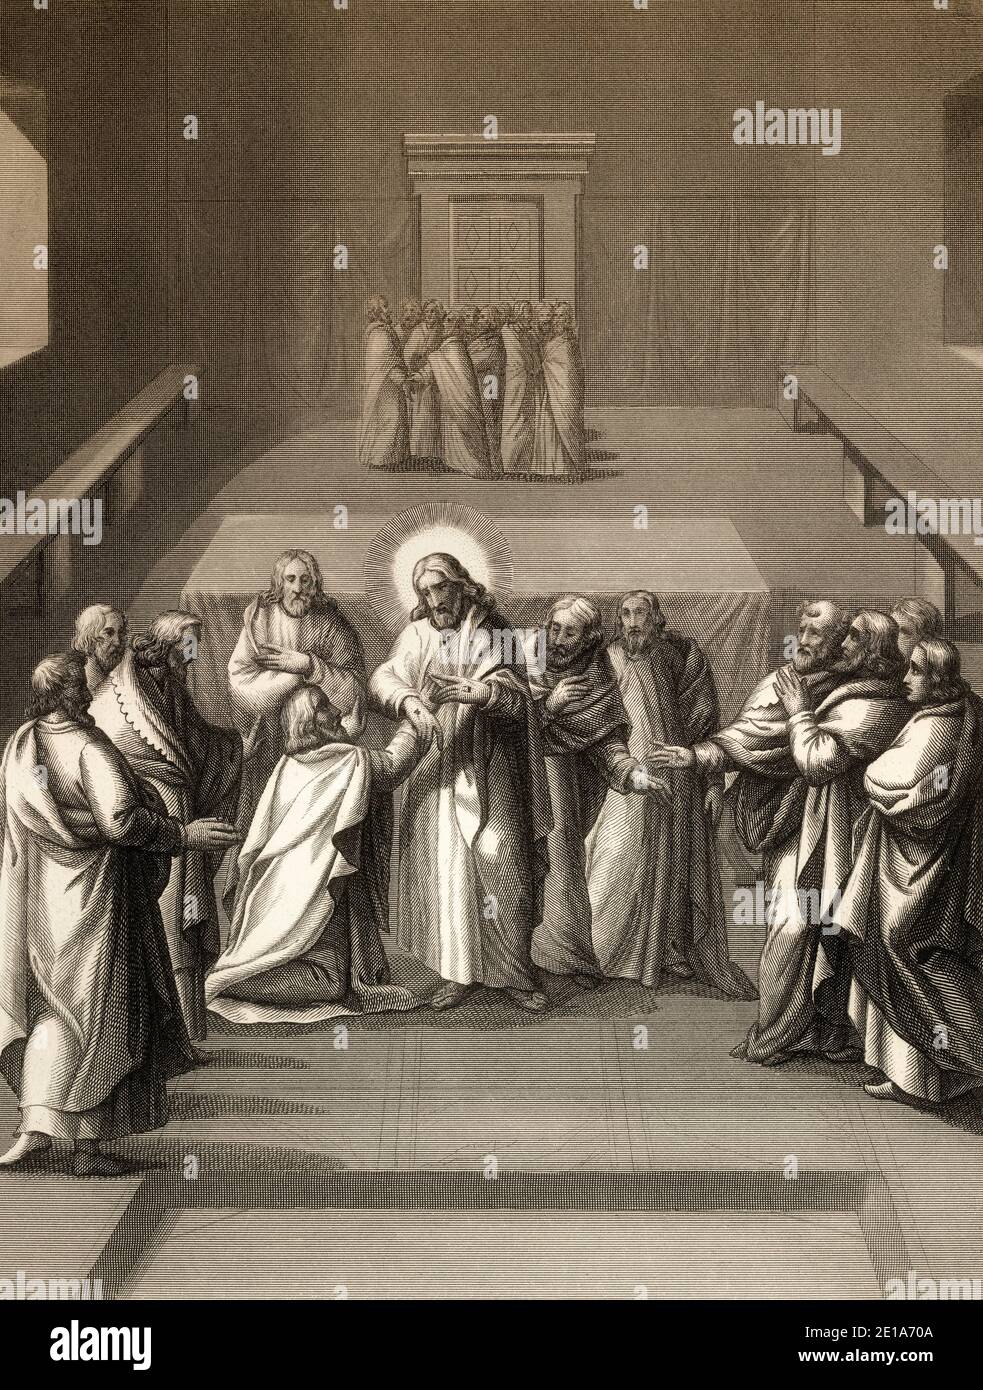 Christ's appearance with doubting Thomas, New Testament, steel engraving 1853, digitally restored Stock Photo